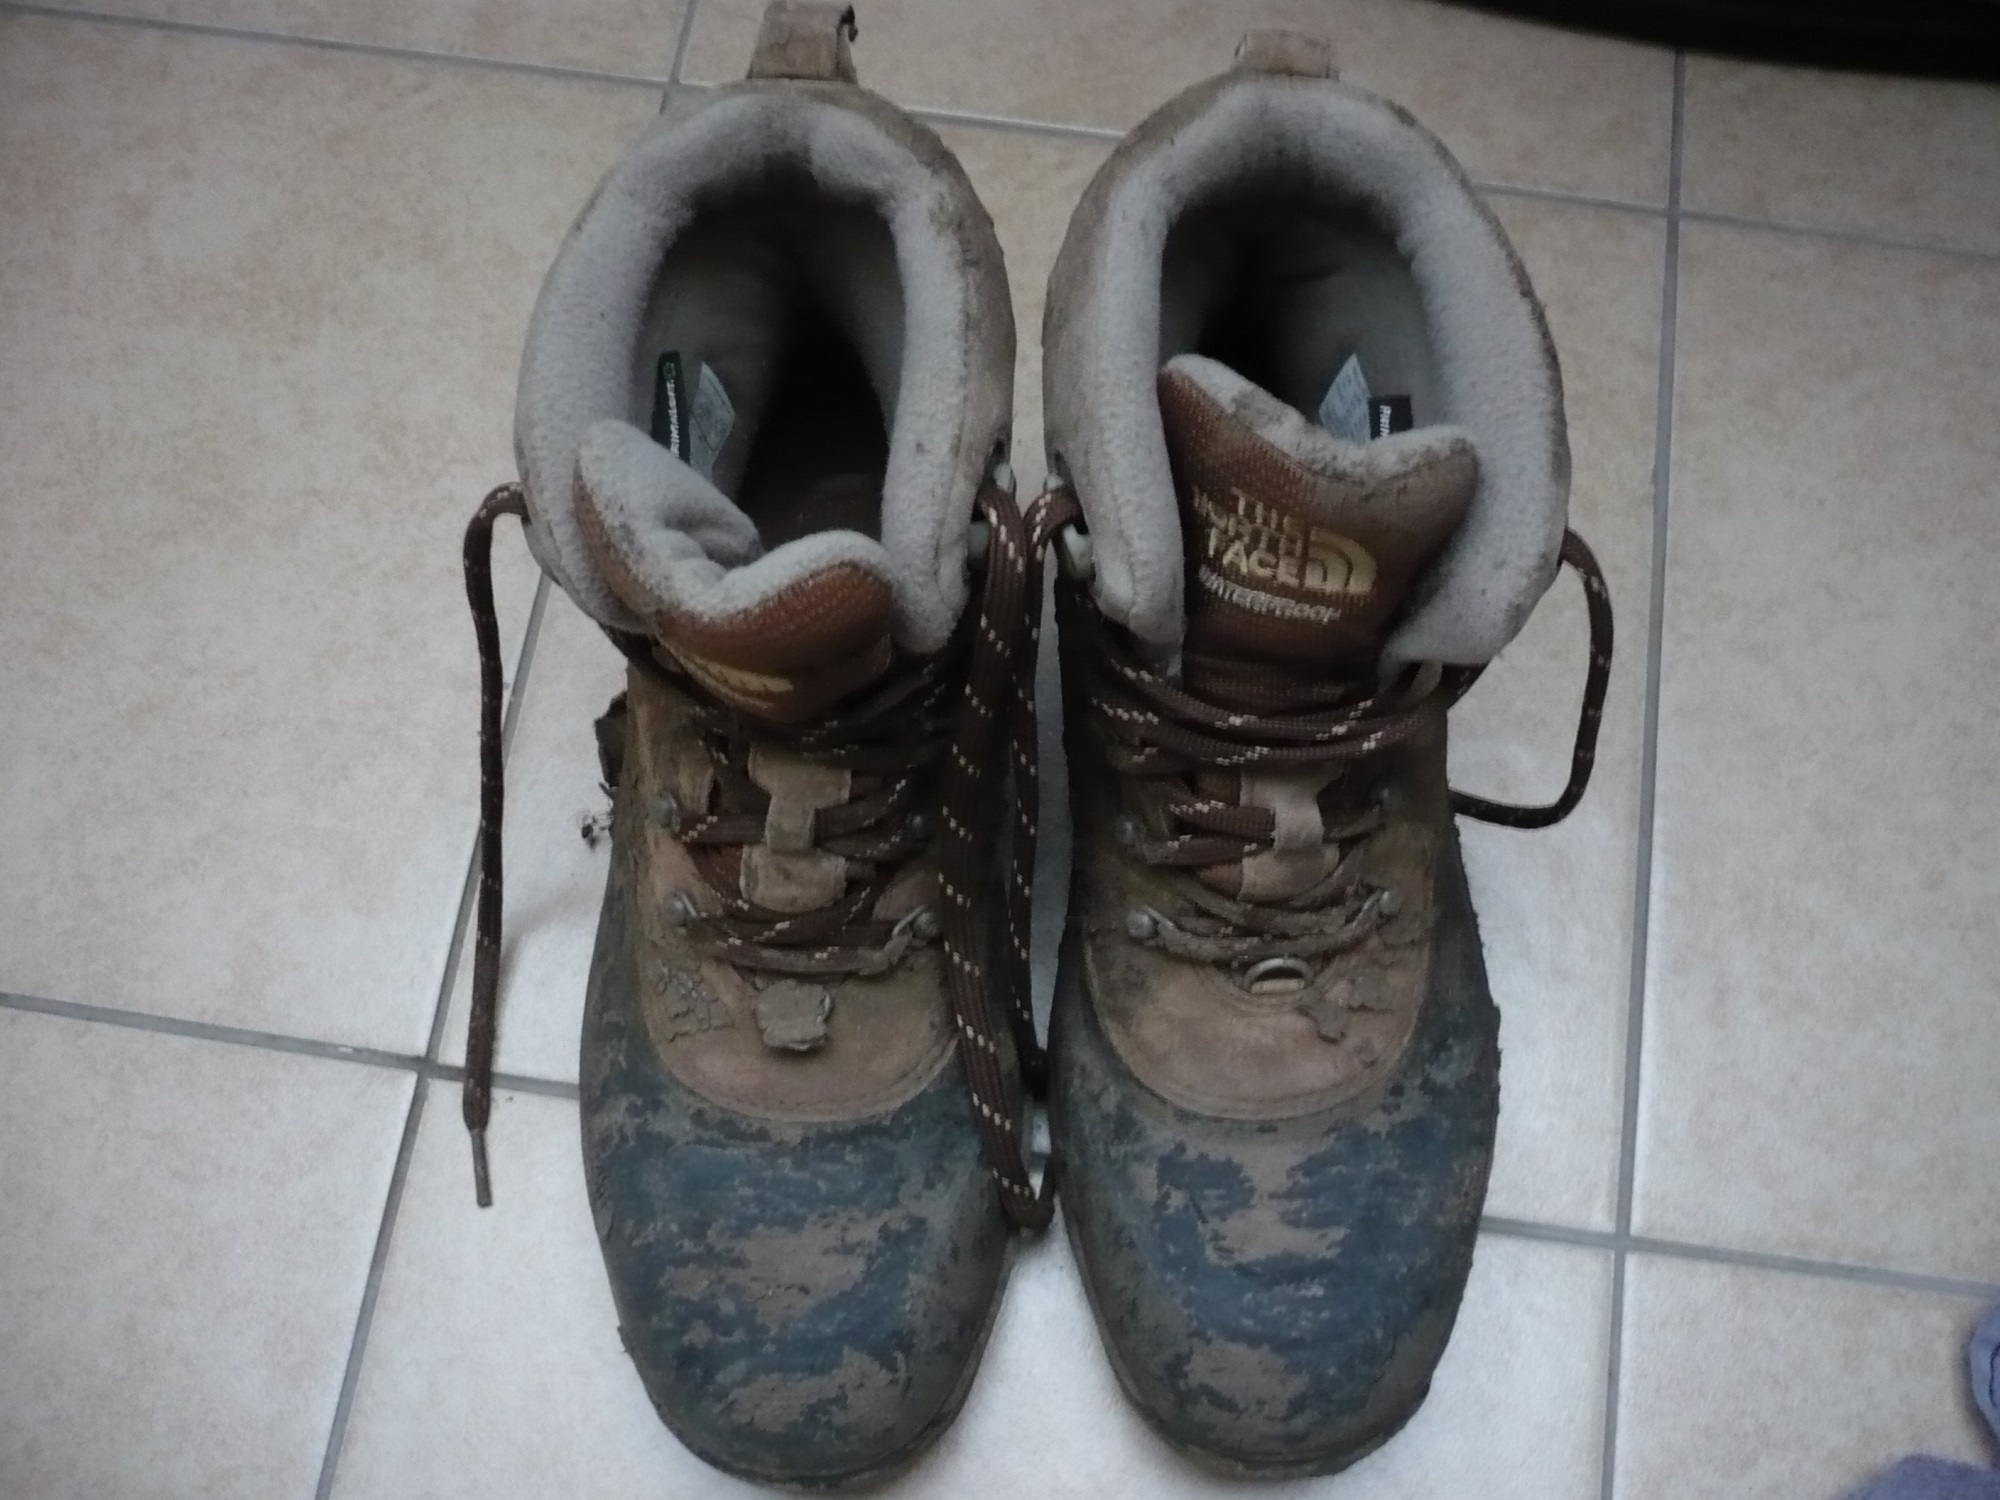 HIKING BOOTS V WELLIES. - Chat 